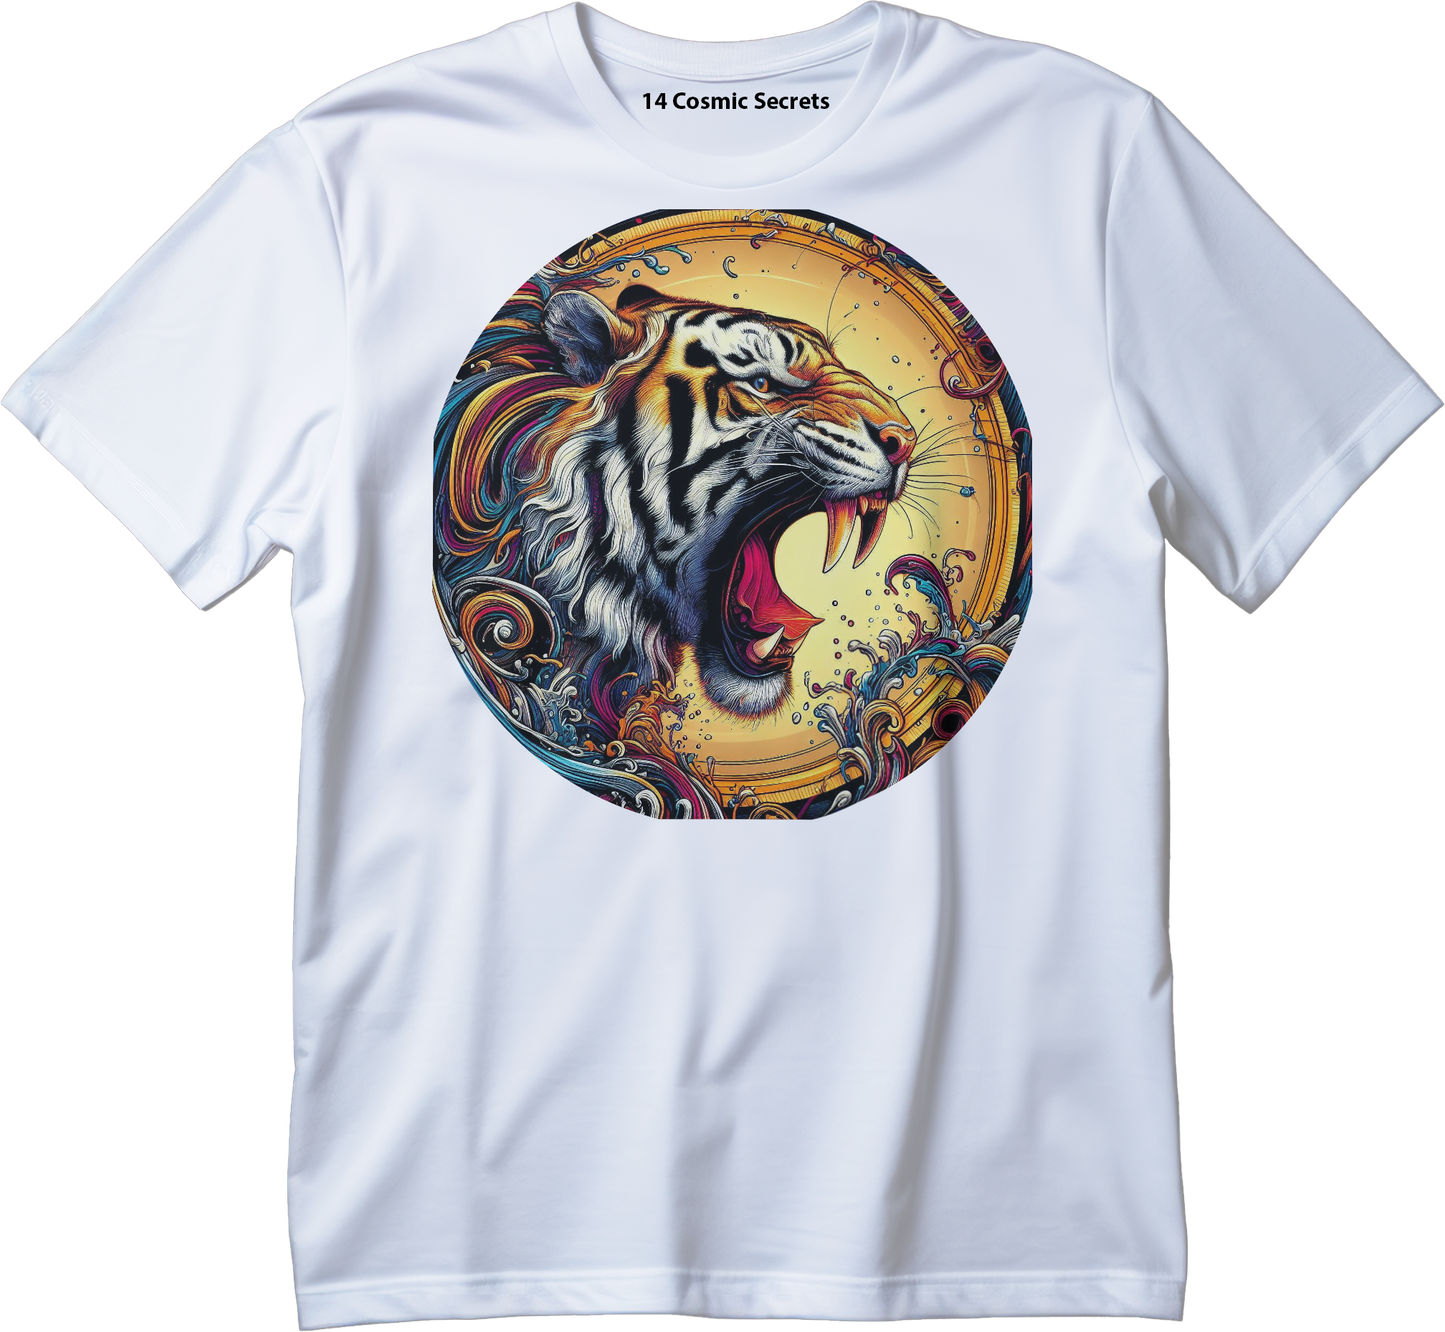 Tiger's Crowned Attire Graphic Printed T-Shirt  Cotton T-Shirt Magnificence of India T-Shirt